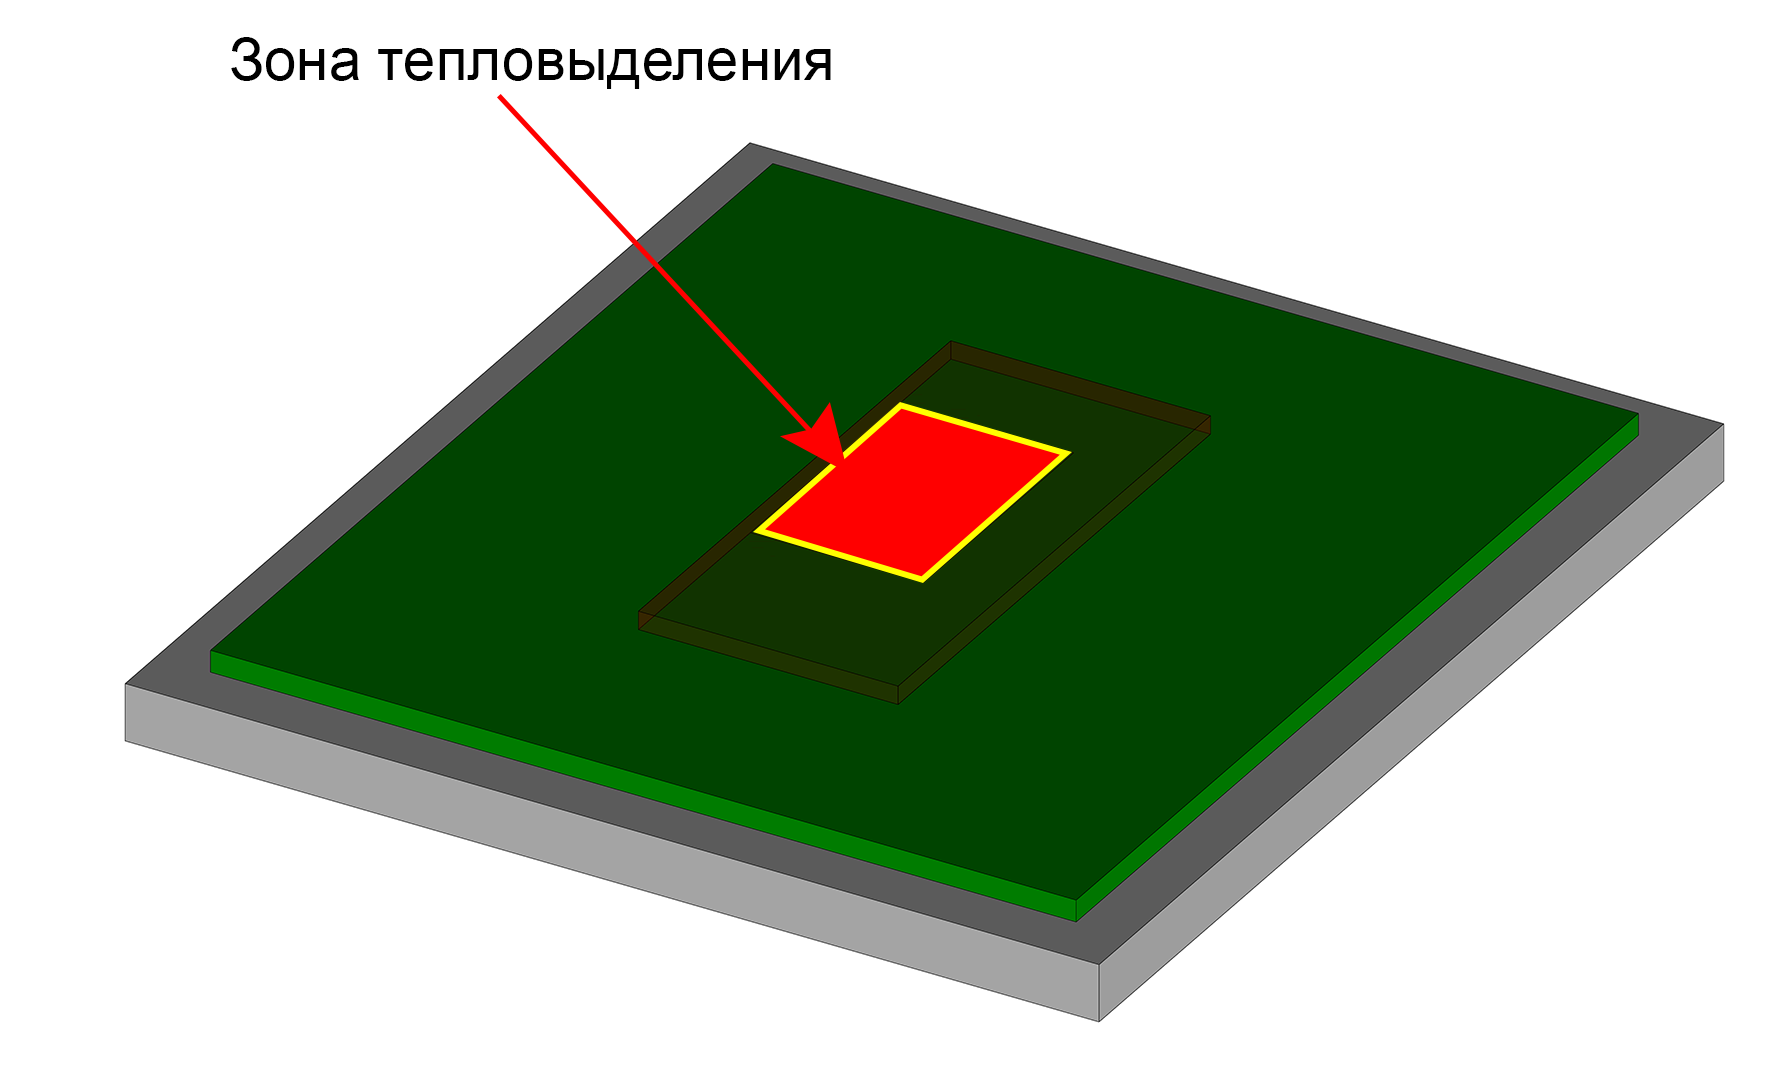 picture 6 heat generation area in the processor chip